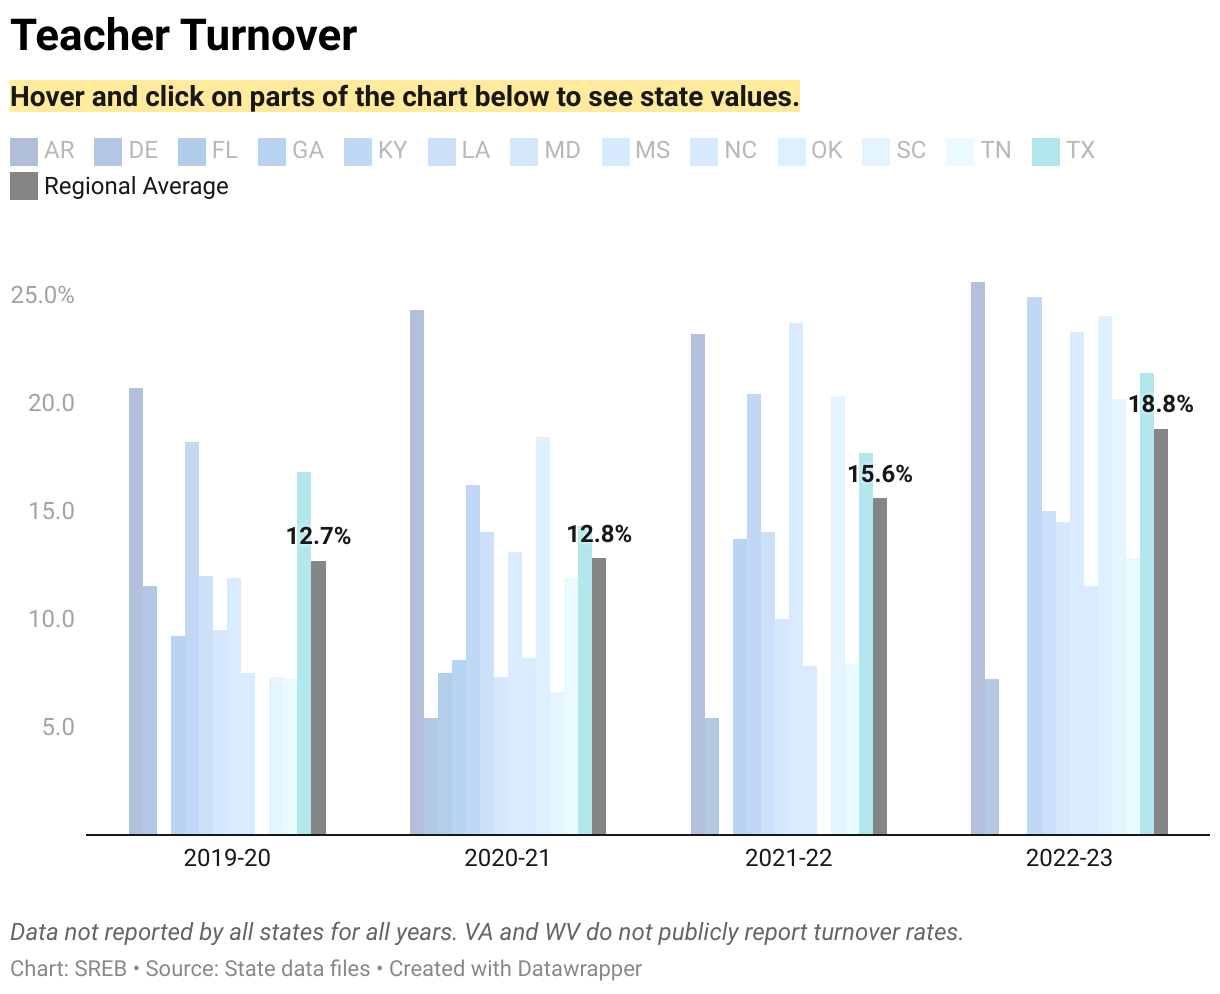 This column chart shows teacher turnover data for SREB states in 2019-20 to 2022-23. 